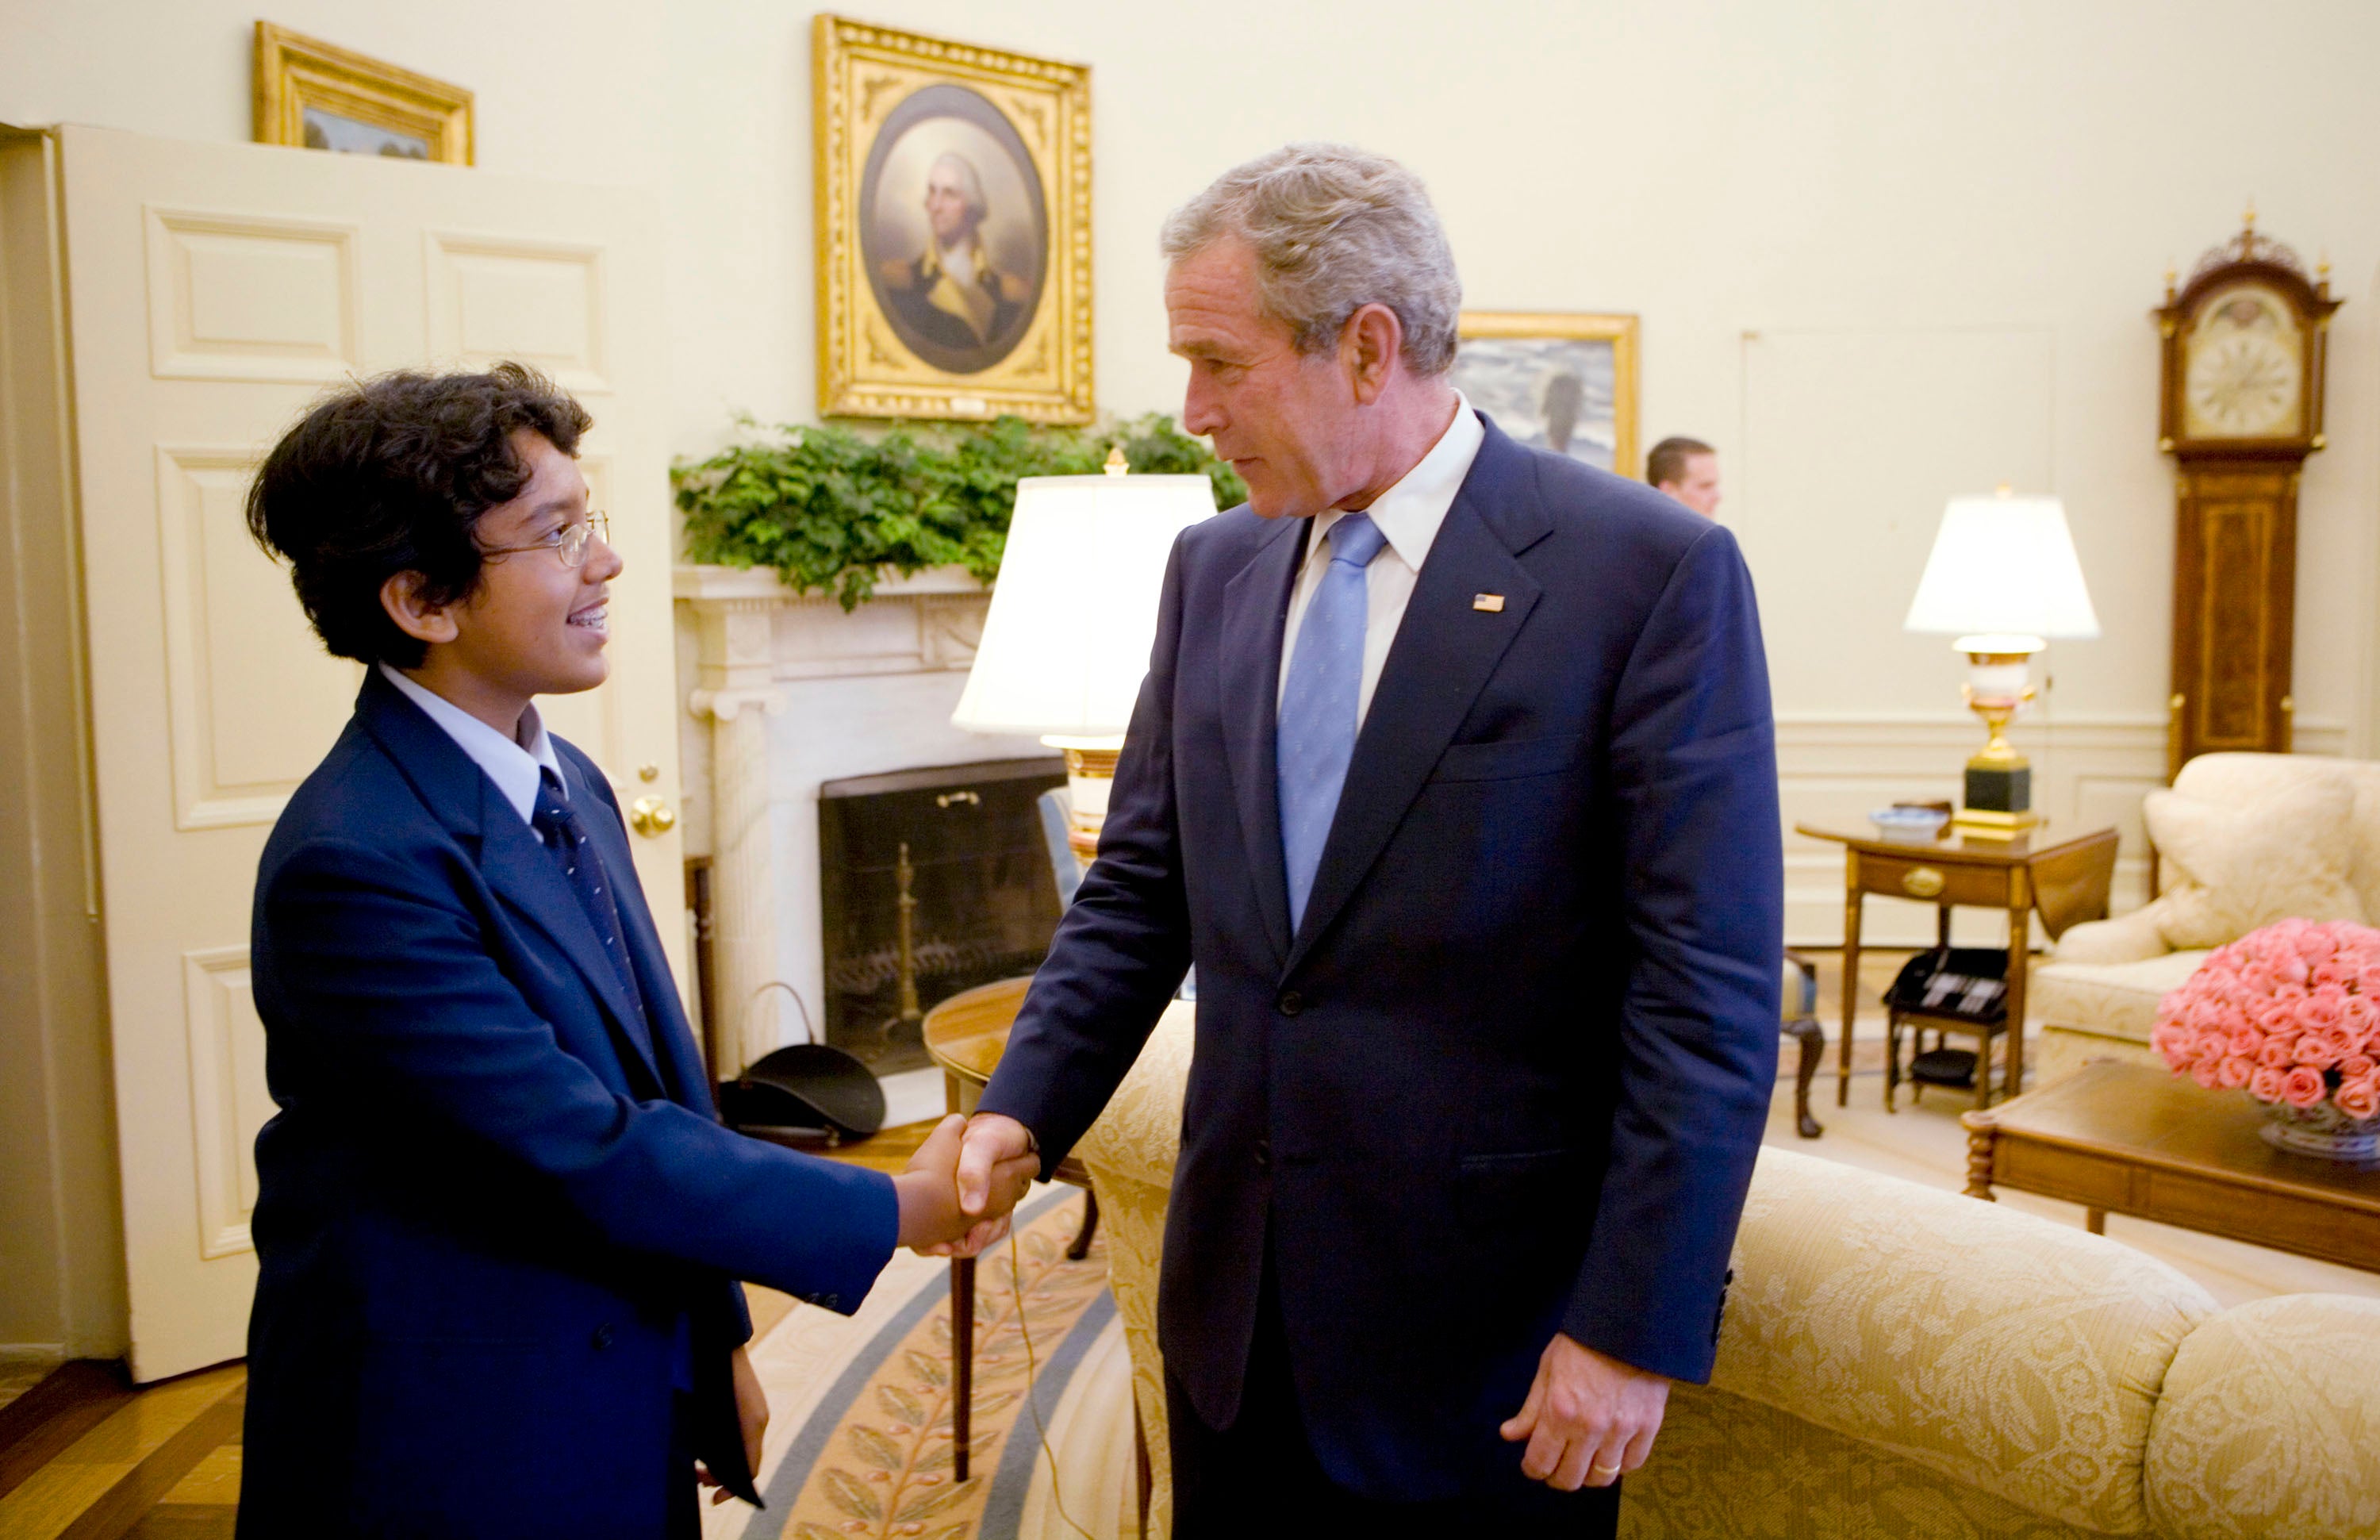 2005 spelling bee winner Anurag Kashyap meets US President George W Bush at The White House in Washington, DC